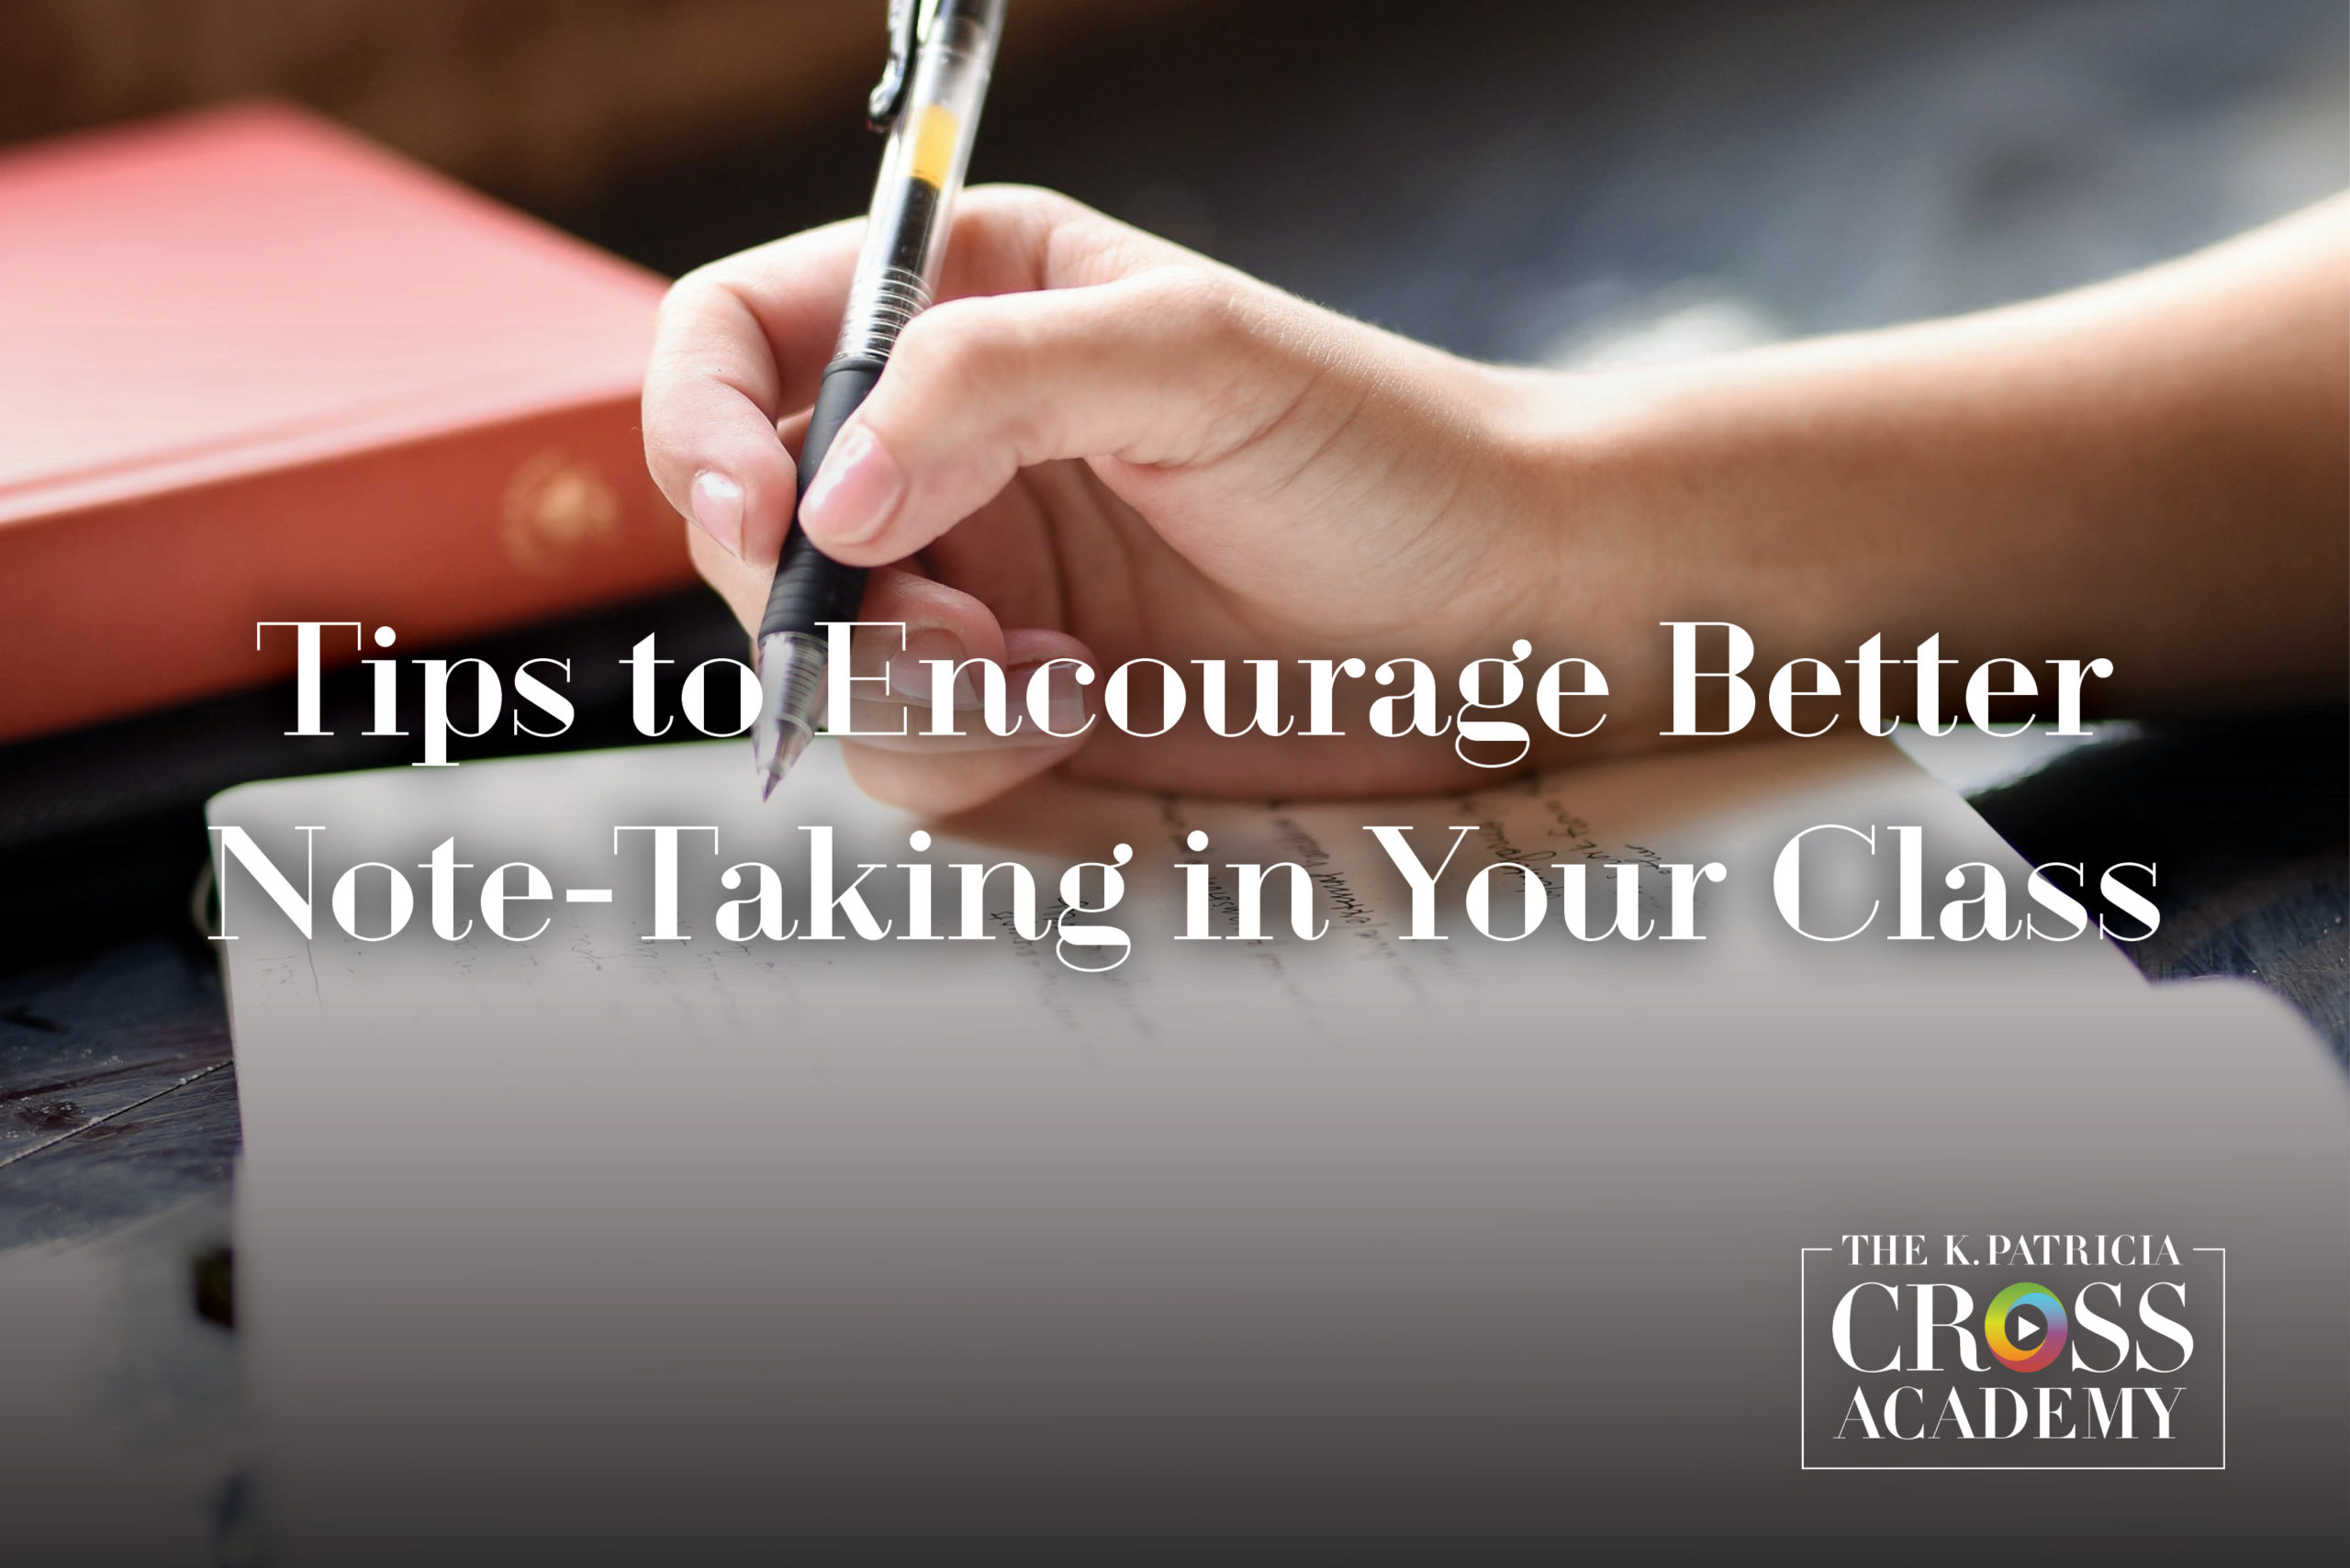 Tips to Encourage Better Note-Taking in Your Class - The K